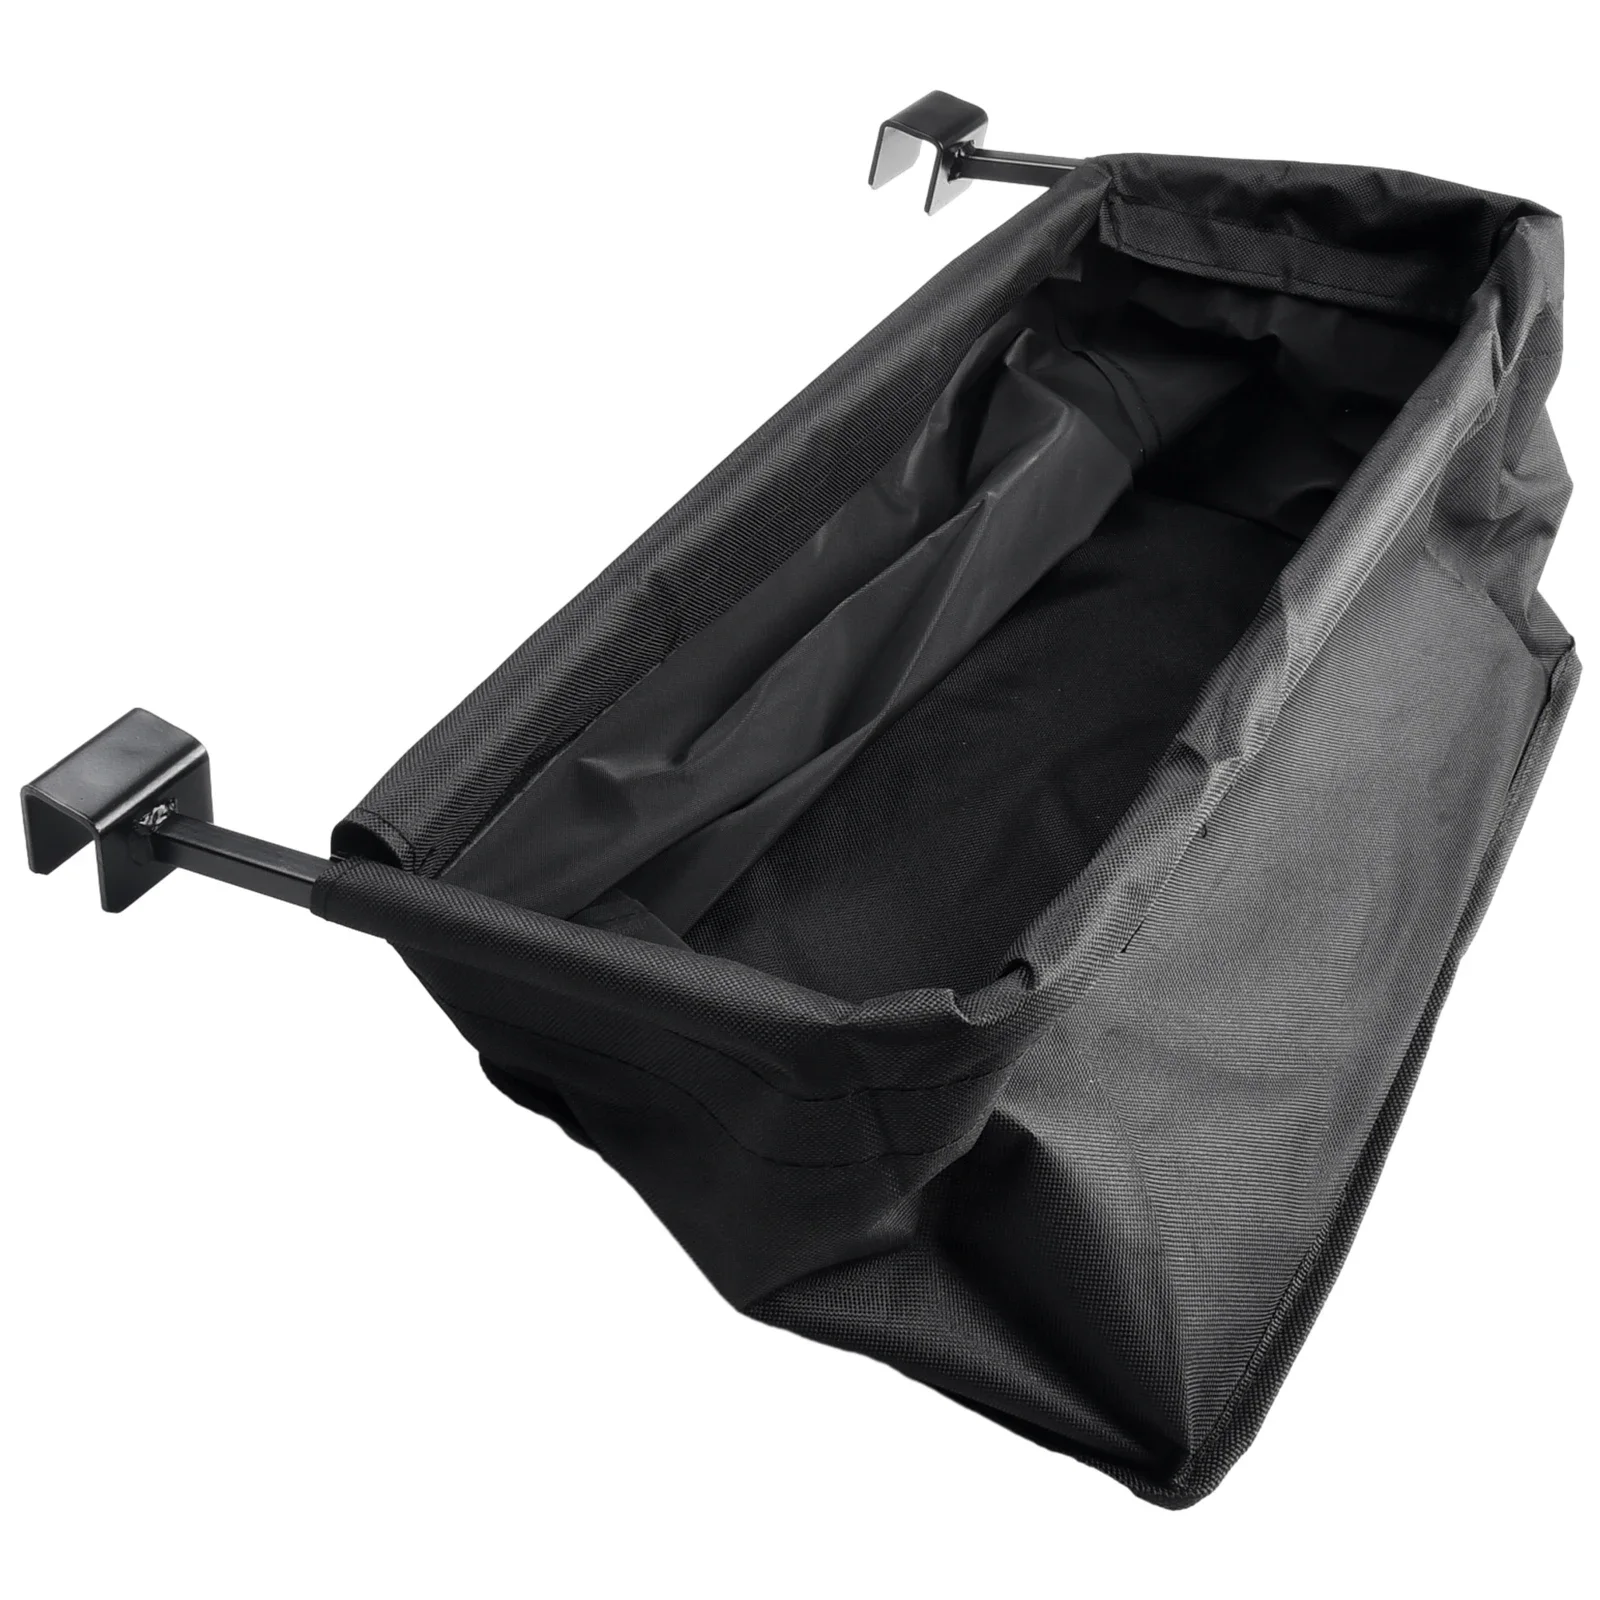 

Brand New High Quality Outdoor Rear Bag 660g / 1.5lb 44*21*20cm/17.3*8.3*7.9in 46cm / 18.1in Frame Width 1 Set